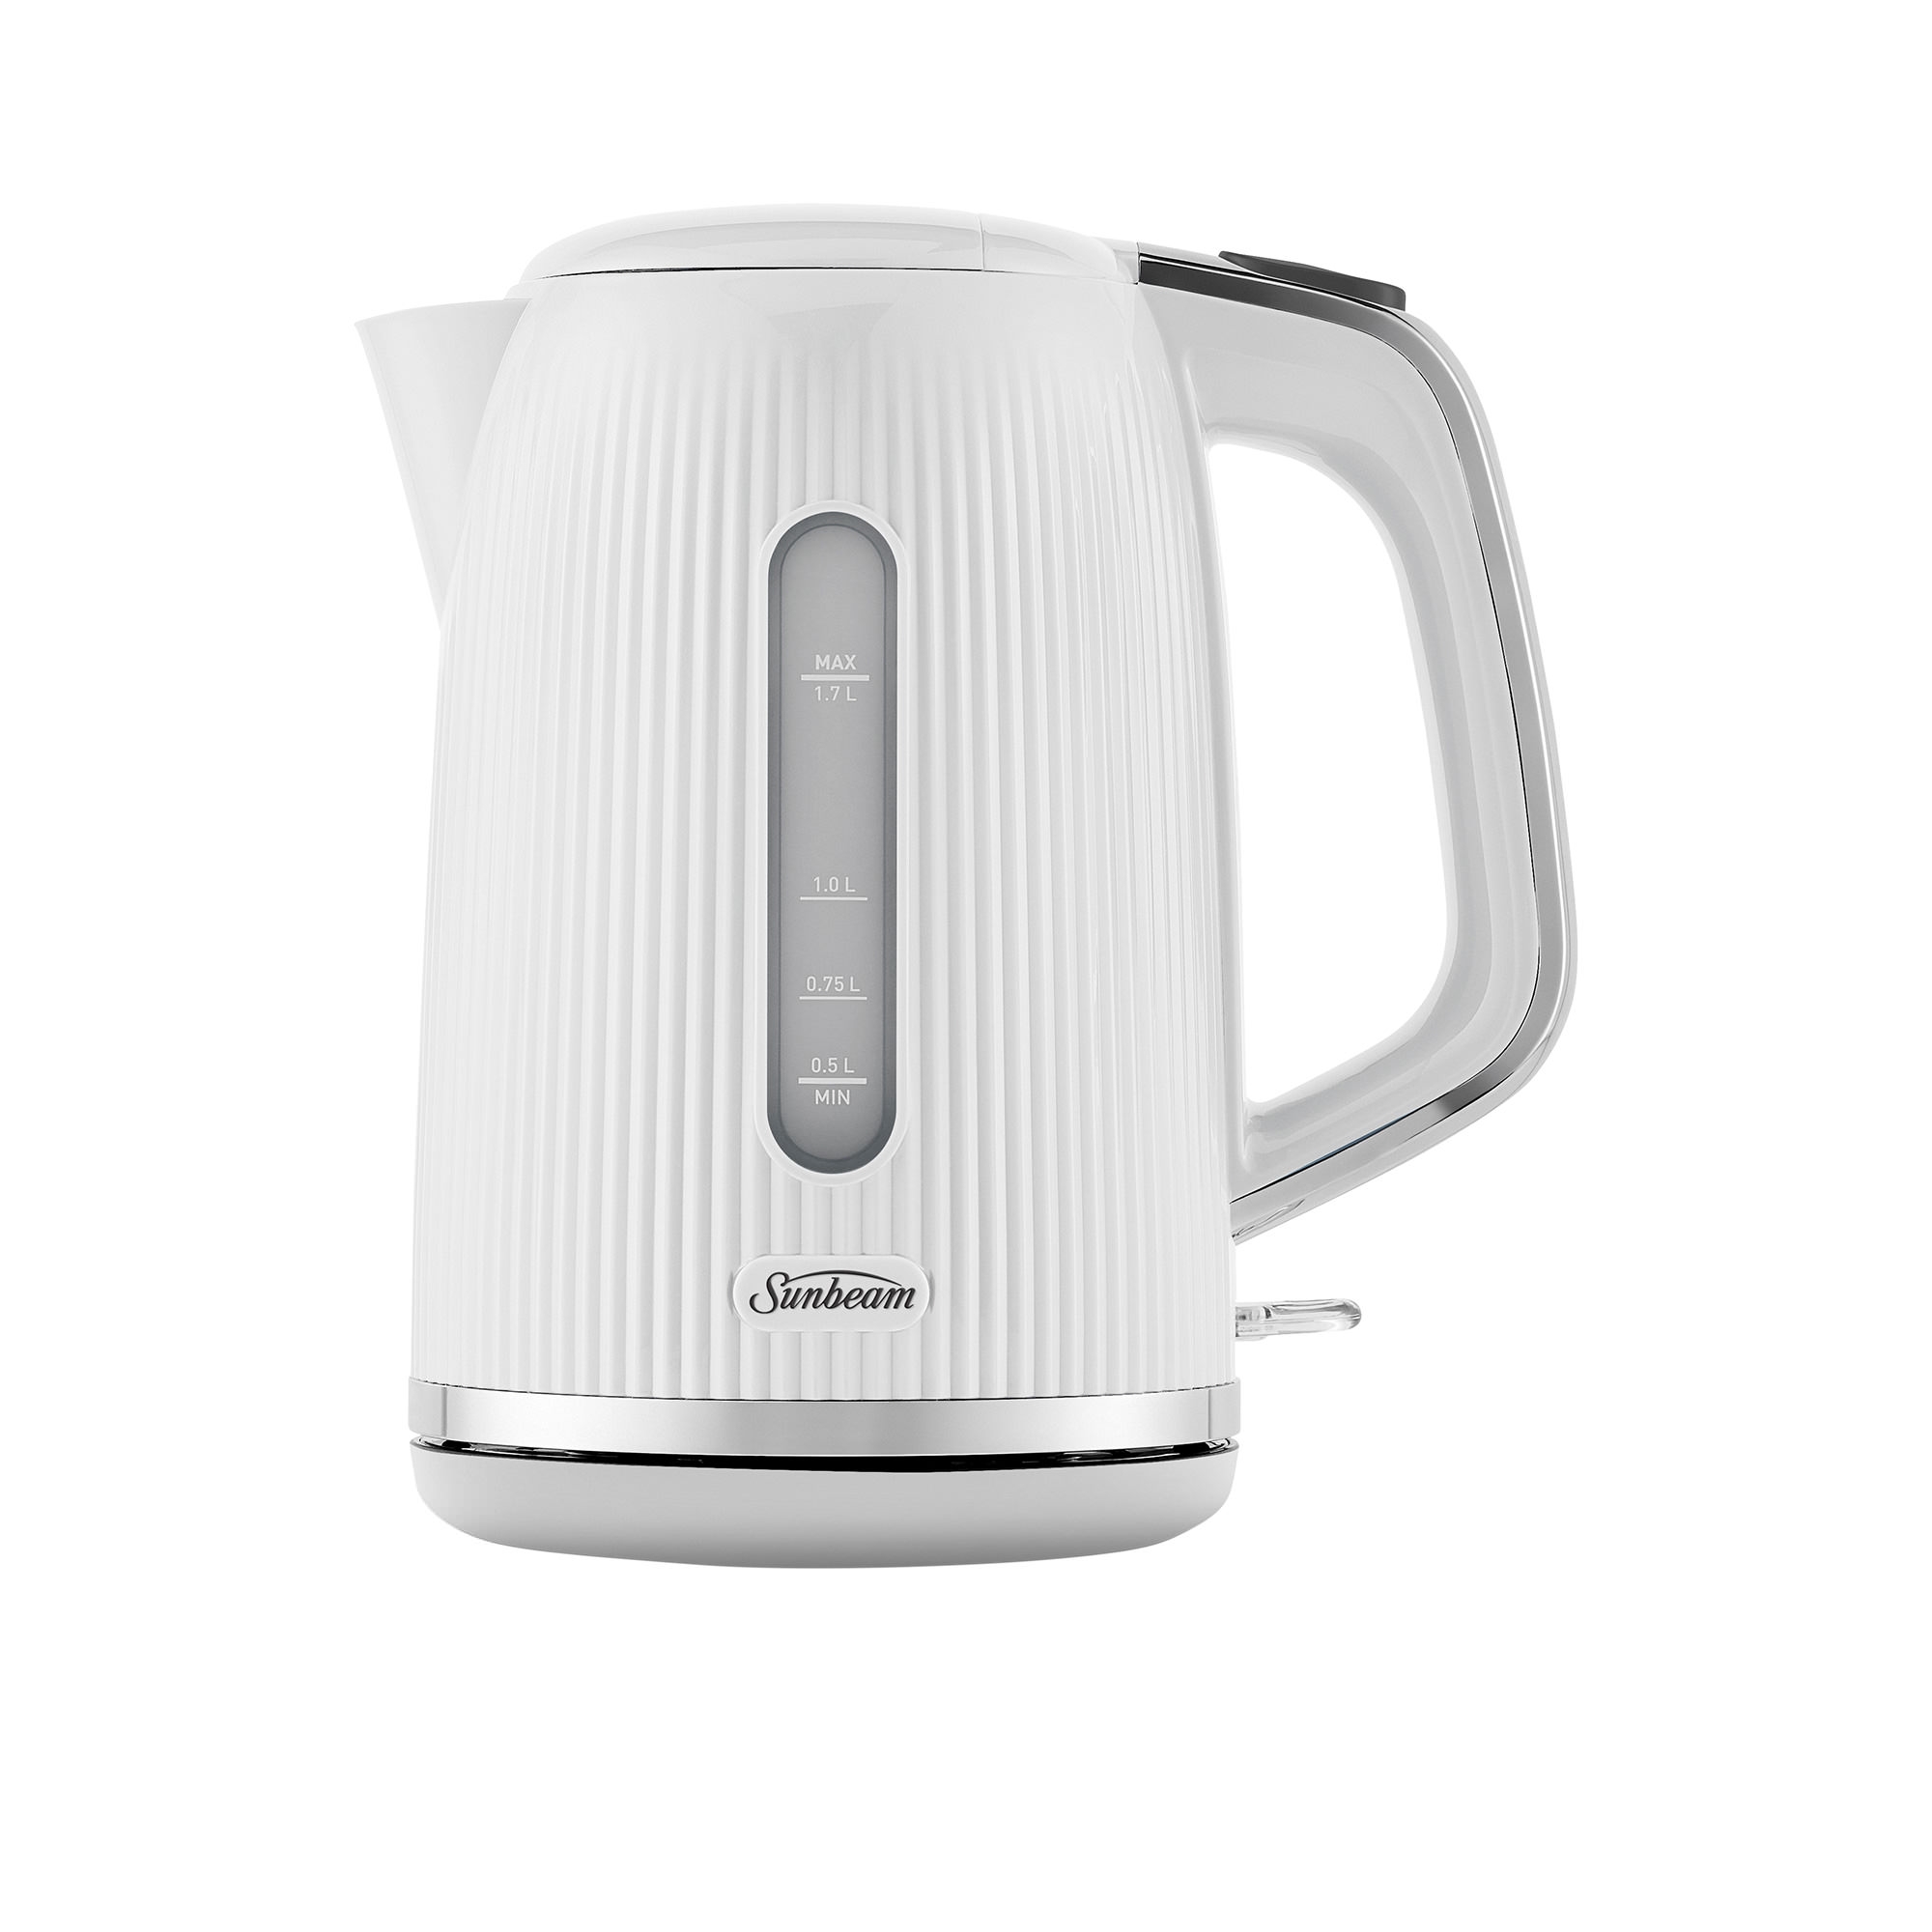 Sunbeam Brightside KEP1007WH Electric Kettle 1.7L White Image 1